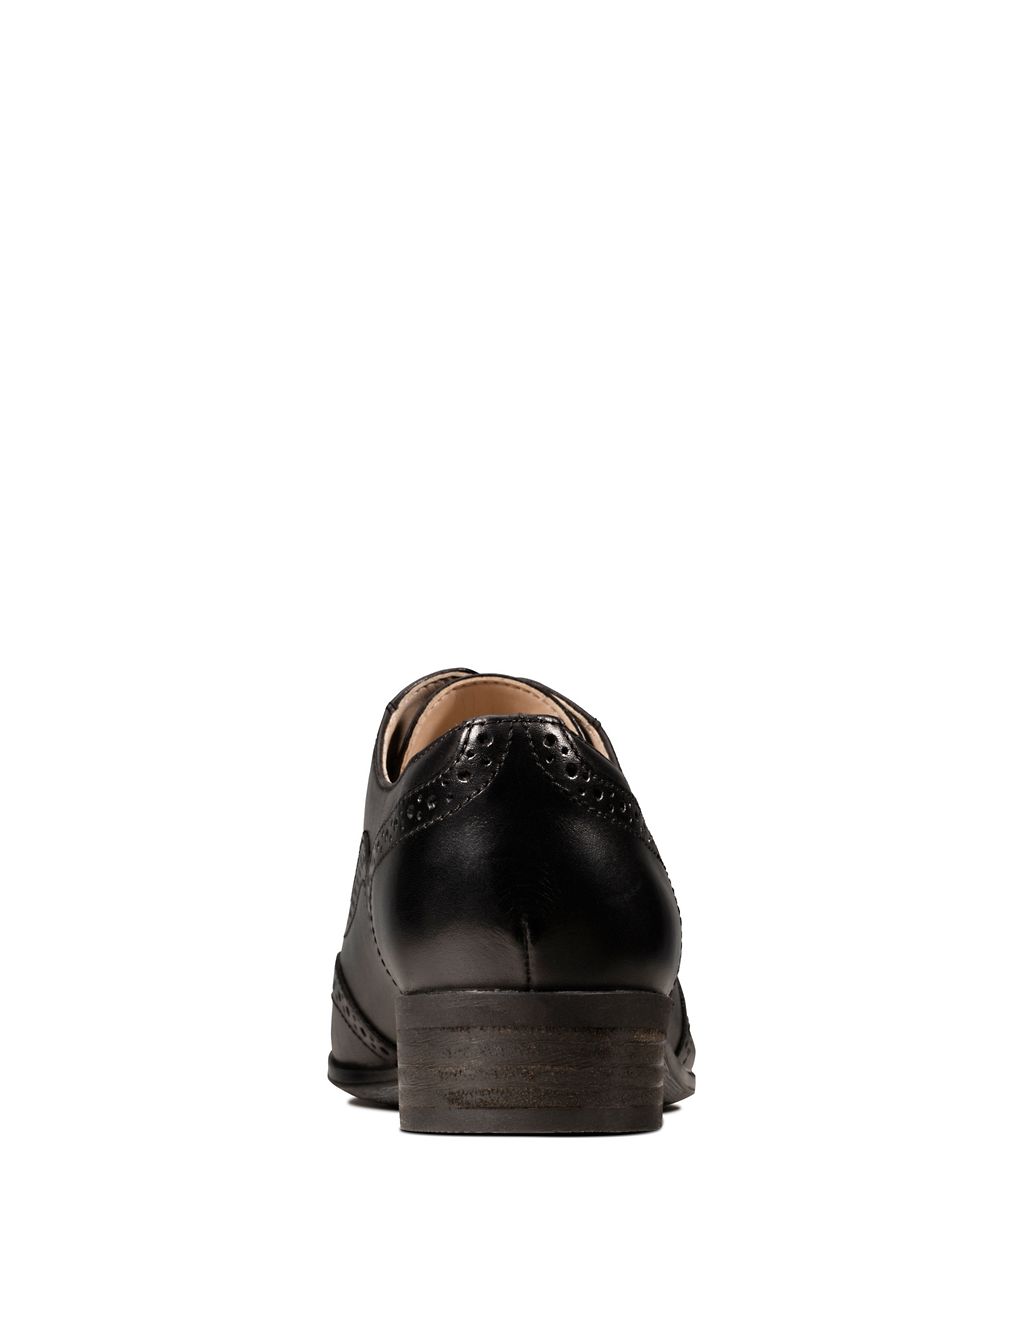 Wide Fit Leather Flat Brogues 4 of 7